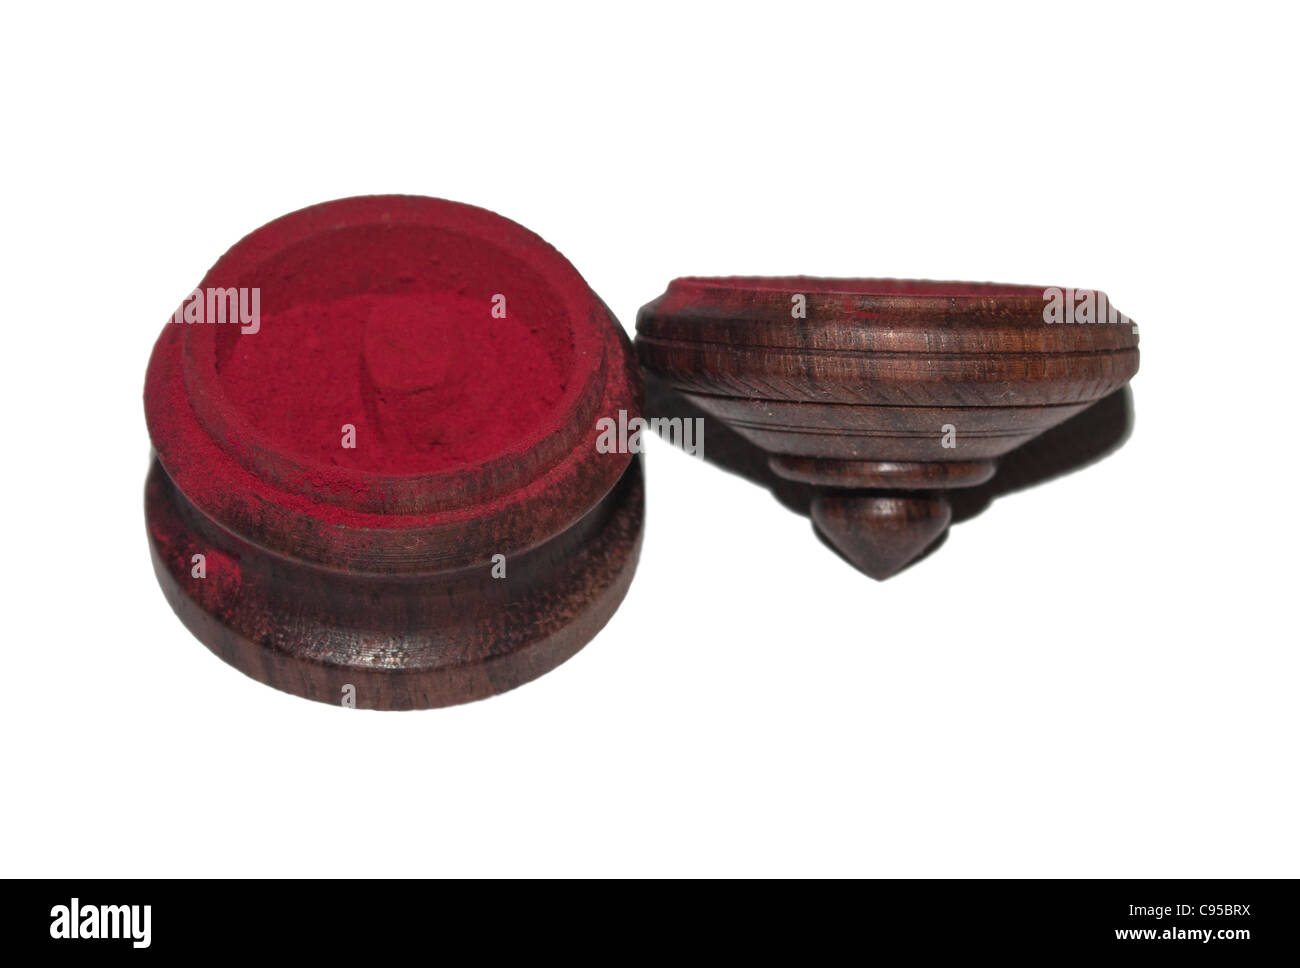 A kumkum box - used by married woman in India as a custom Stock Photo